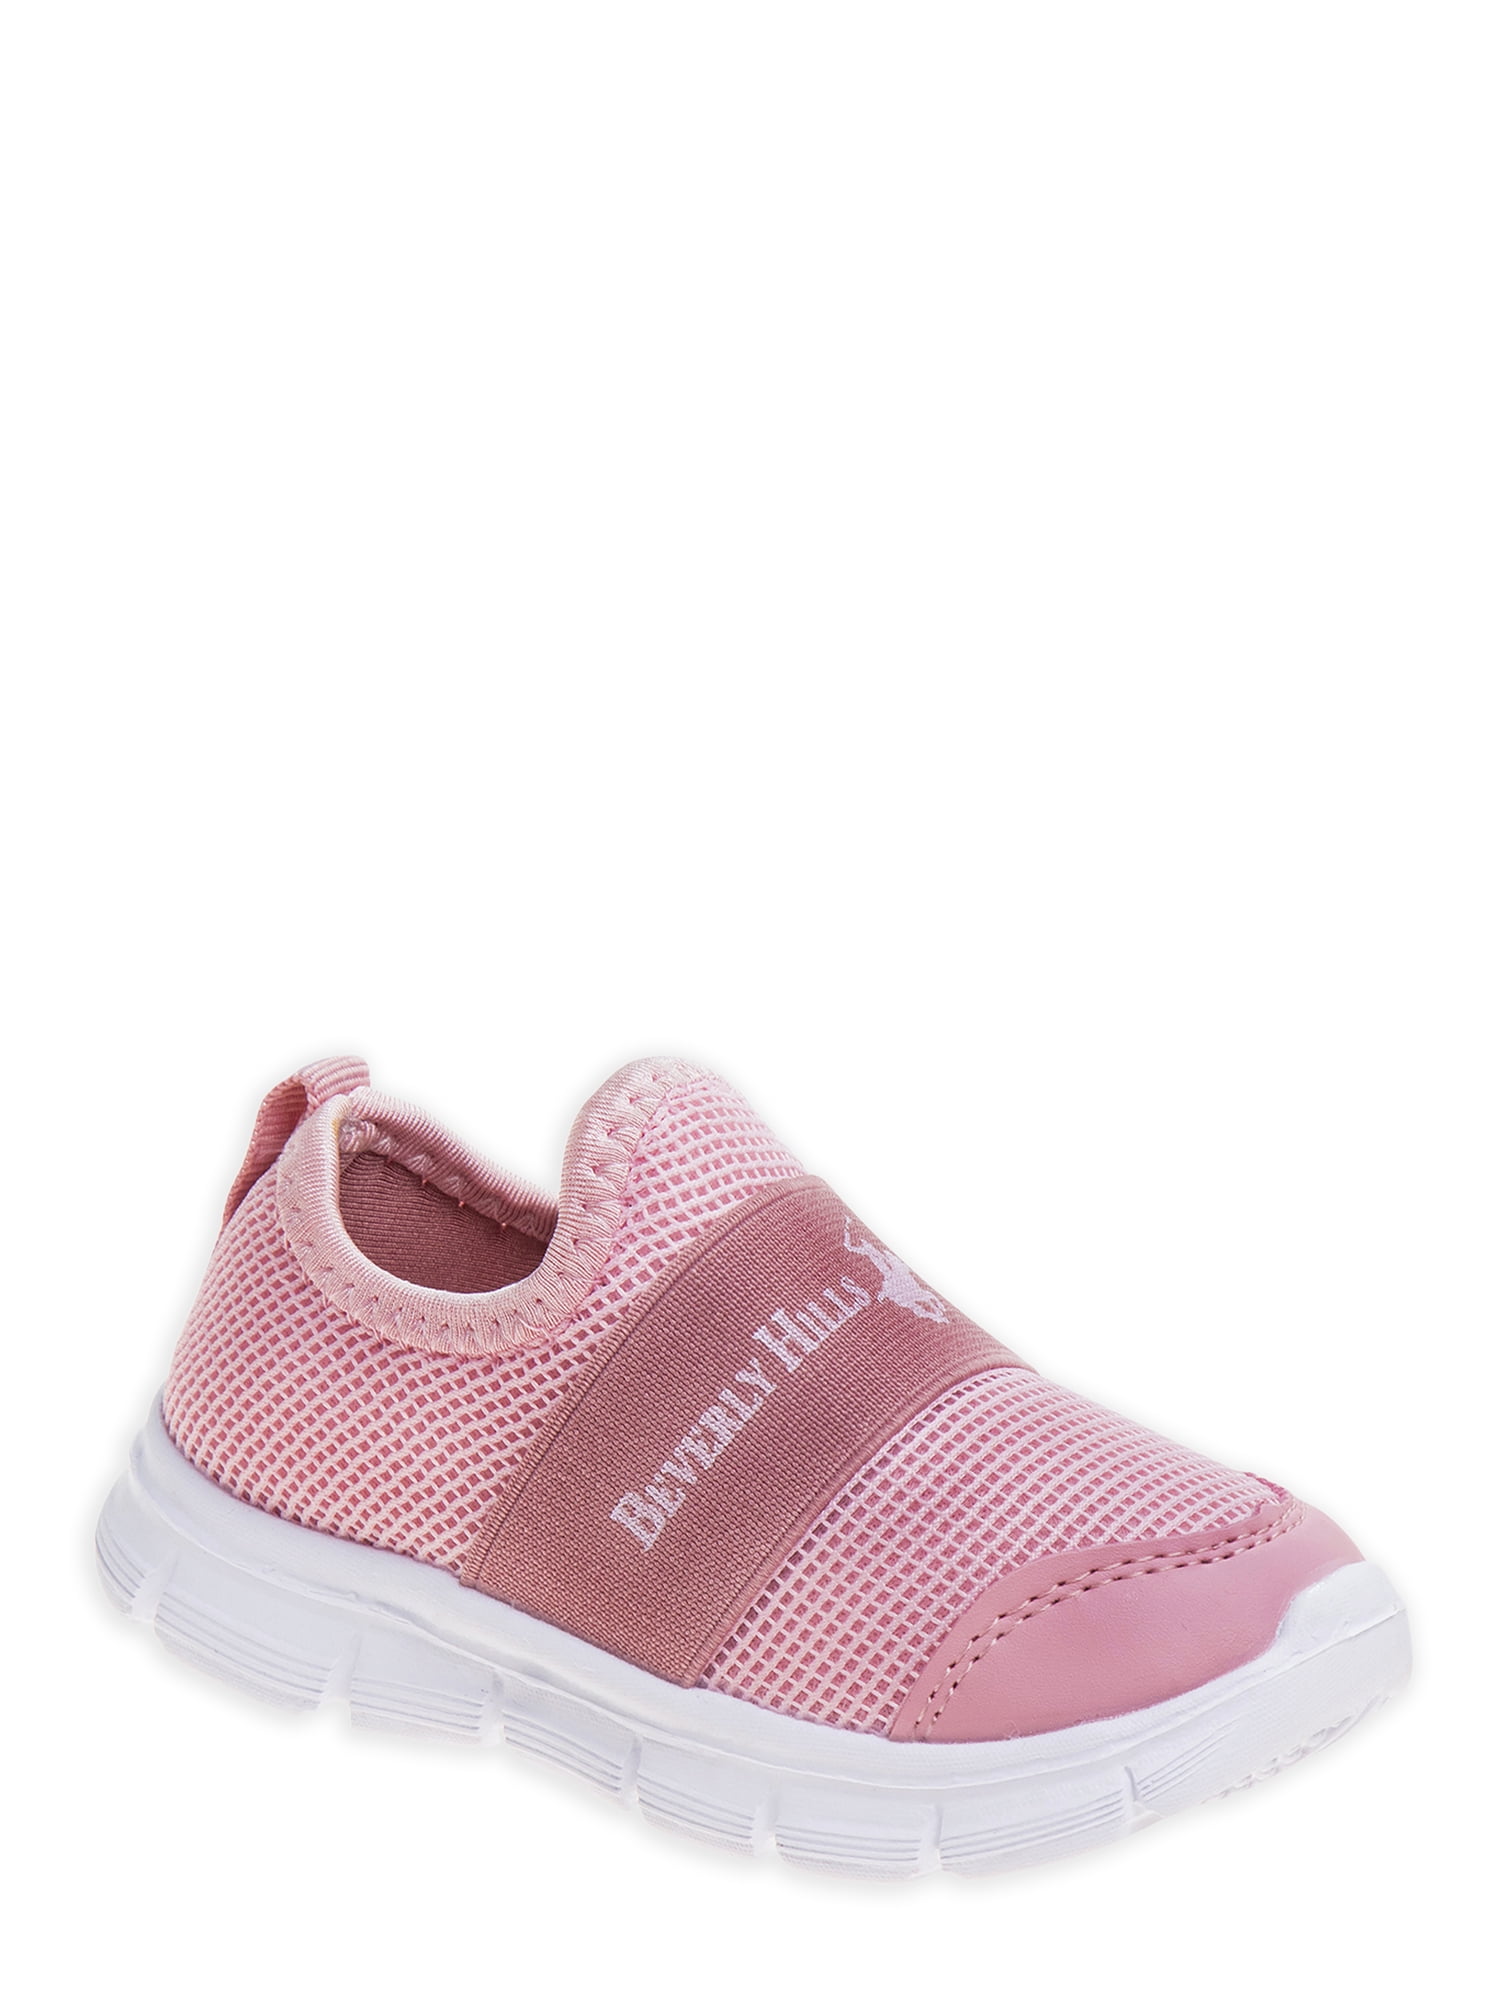 Girls PINK Sneakers sport casual lace up size 7 shoes baby garanimals USA seller 